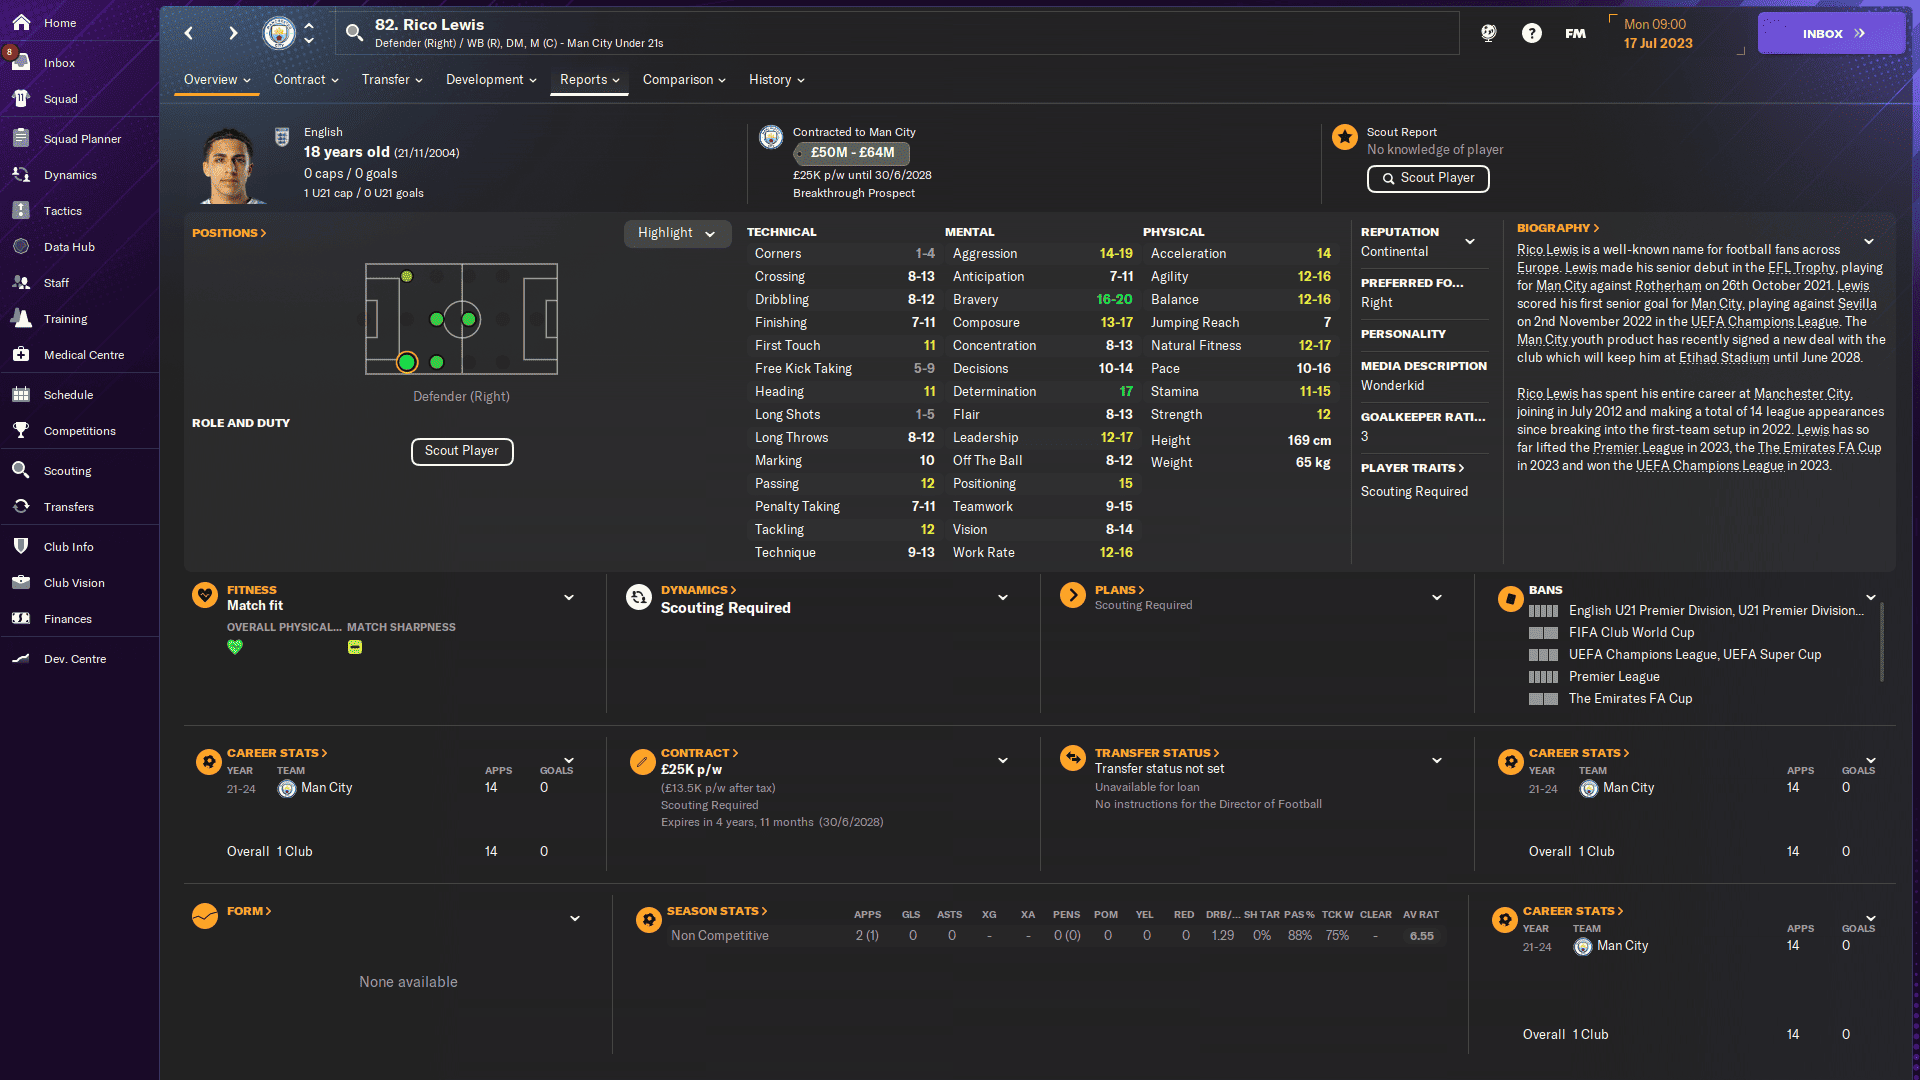 FM24 best RB to sign: Rico Lewis' profile in FM24